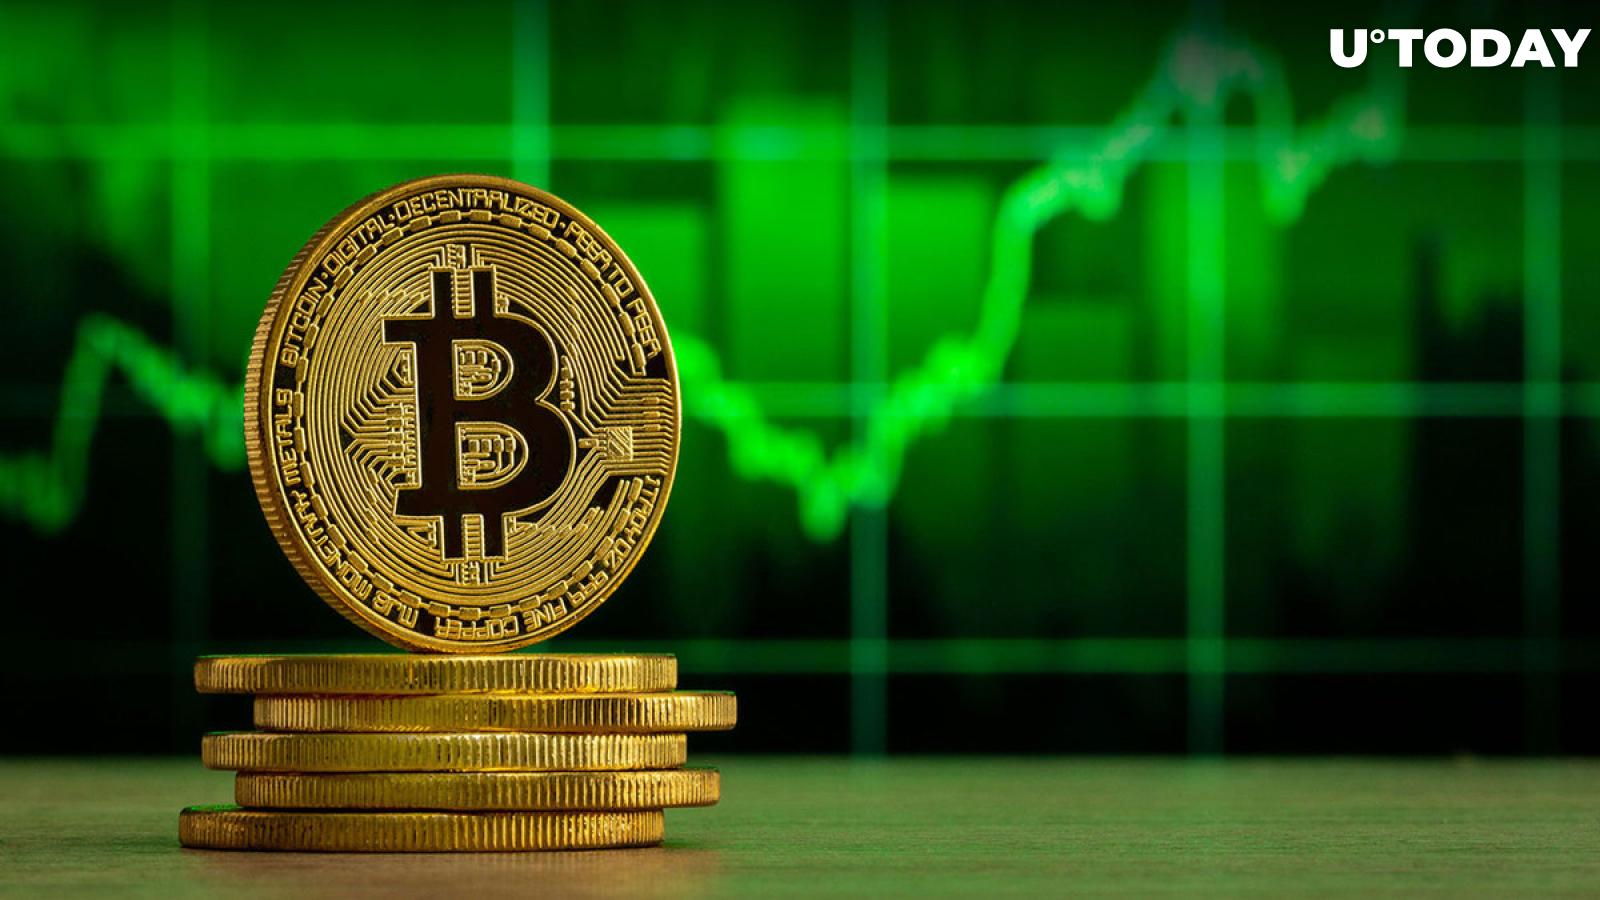 Bitcoin Price Hits $, a 50x Increase in Just 12 Months